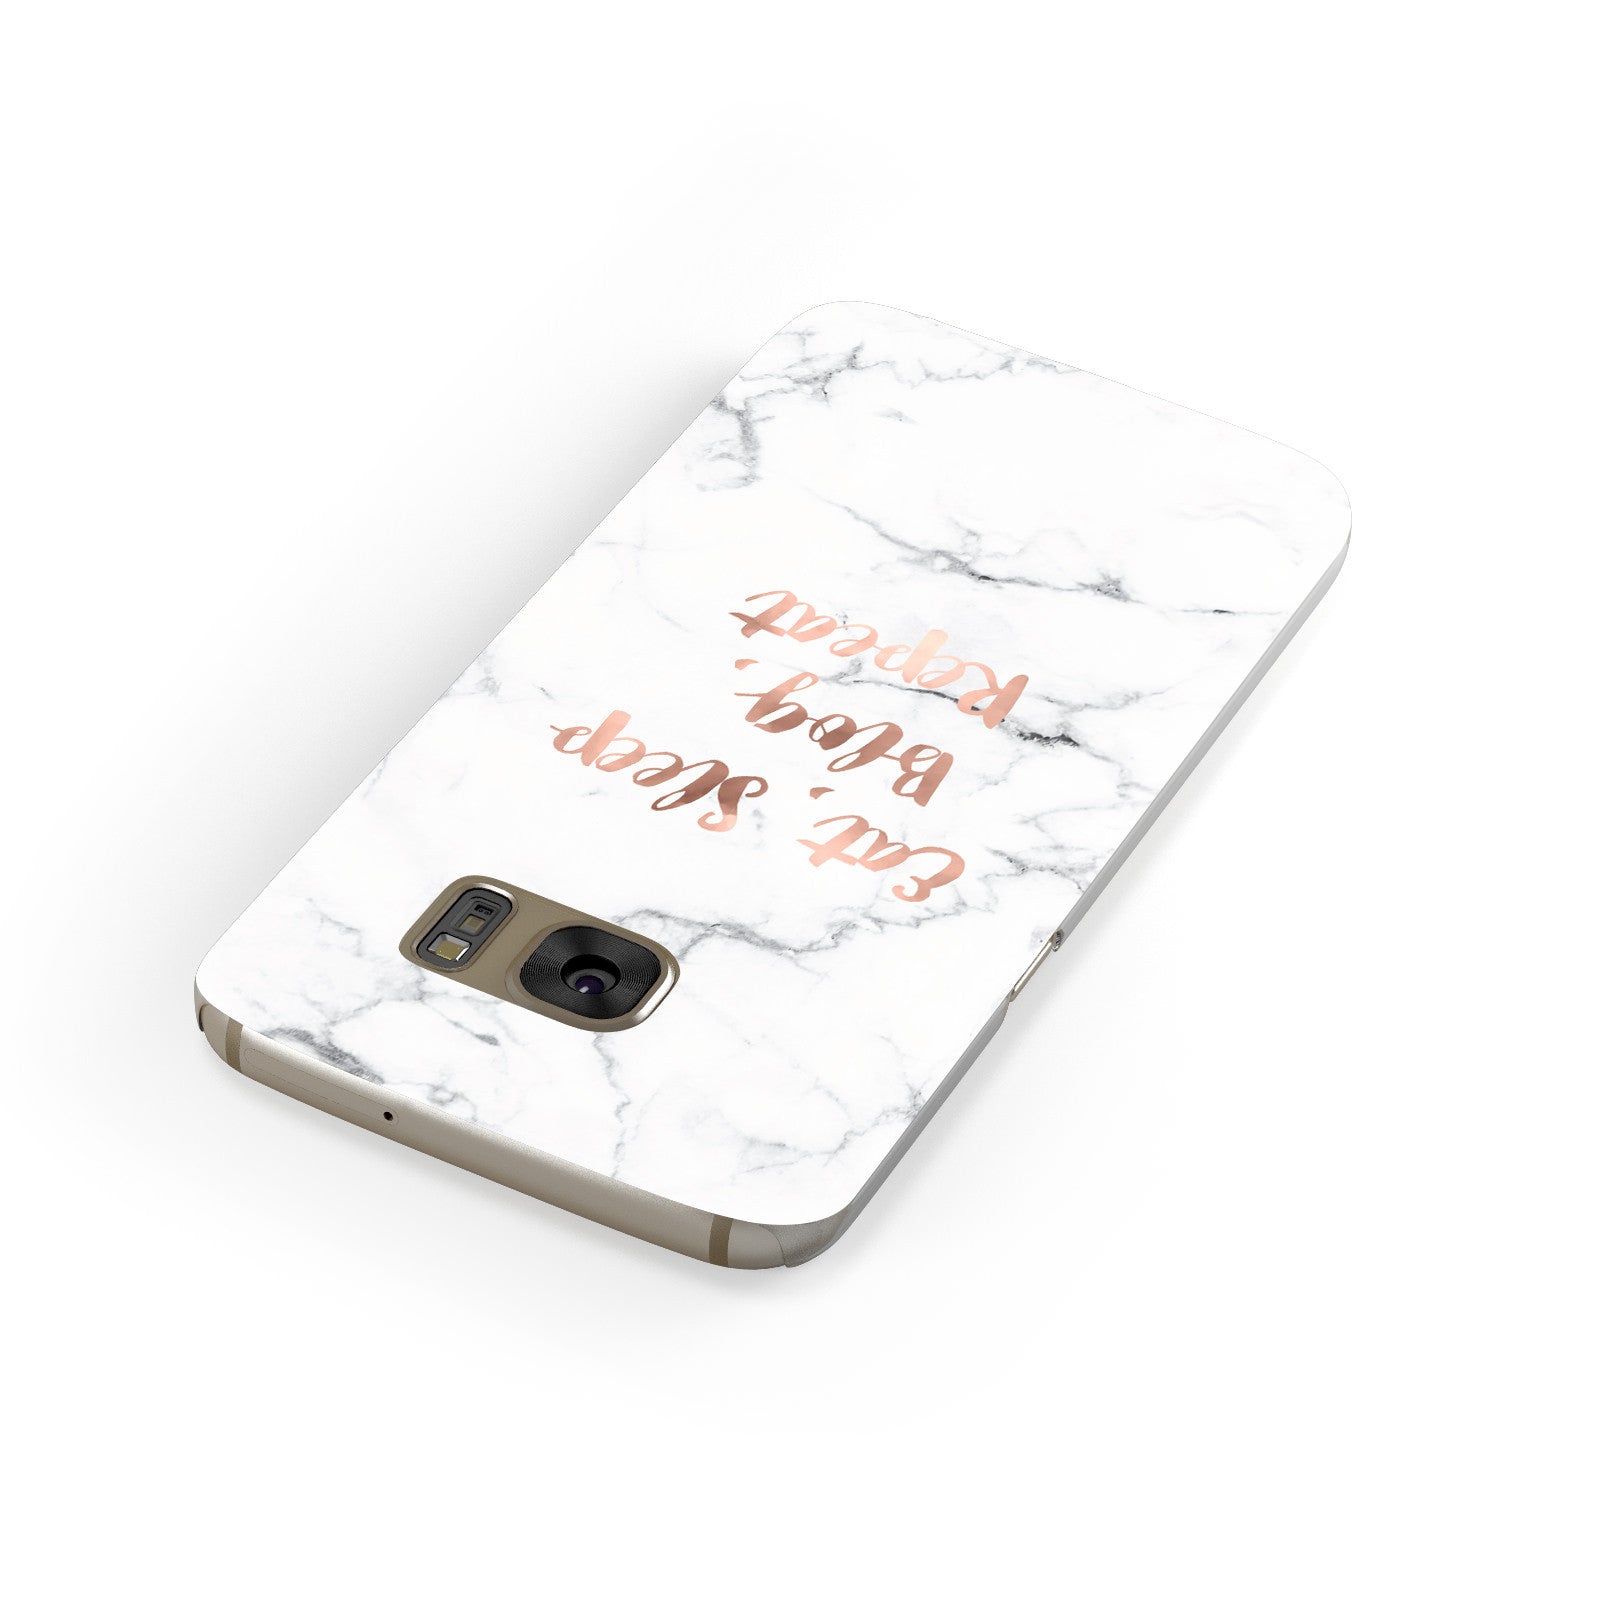 Eat Sleep Blog Repeat Marble Effect Samsung Galaxy Case Front Close Up